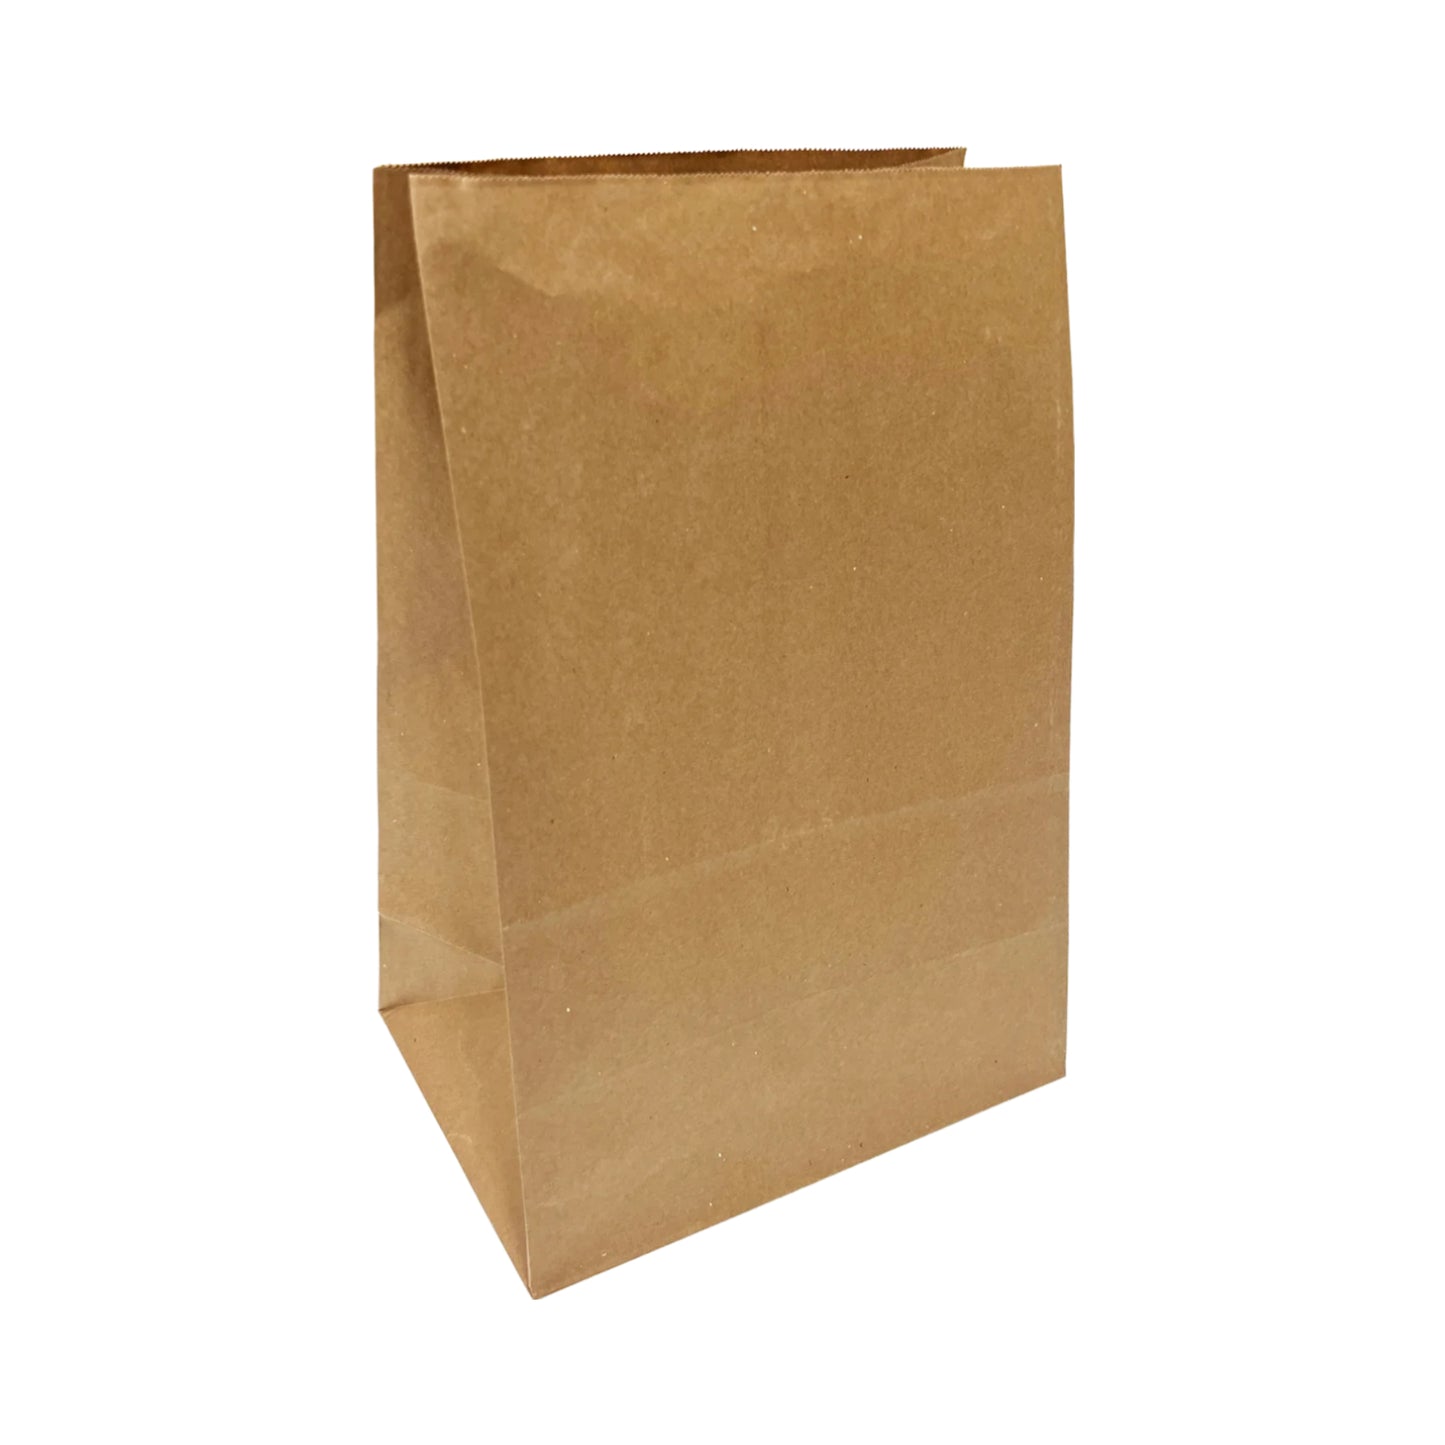 500pcs #12 Grocery Bags 7x4.5x13.75 inches; $0.06/pc